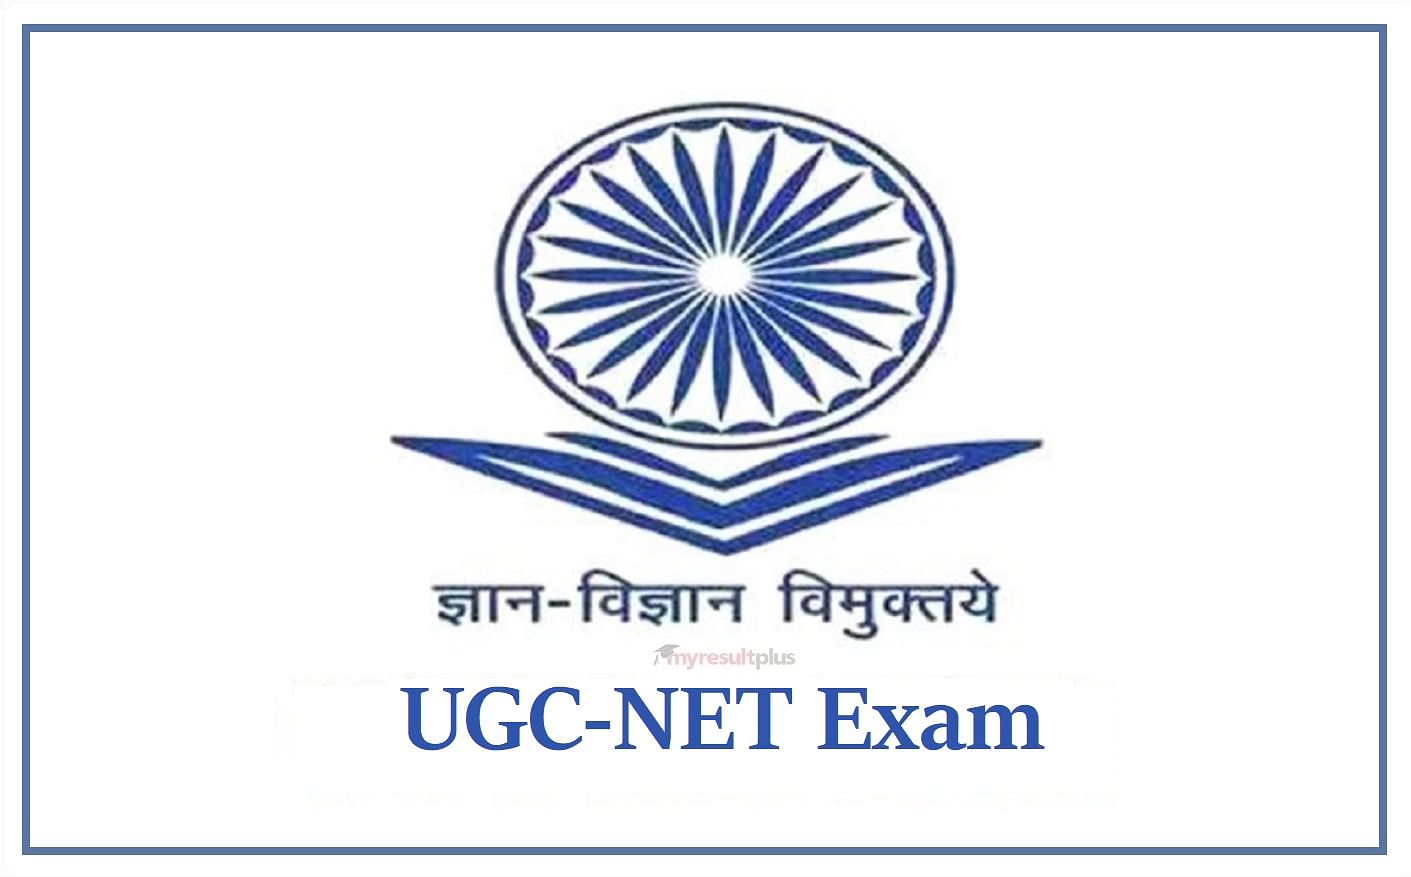 NTA UGC NET June 2022: Know the Date and Time for Exam Schedule Here.